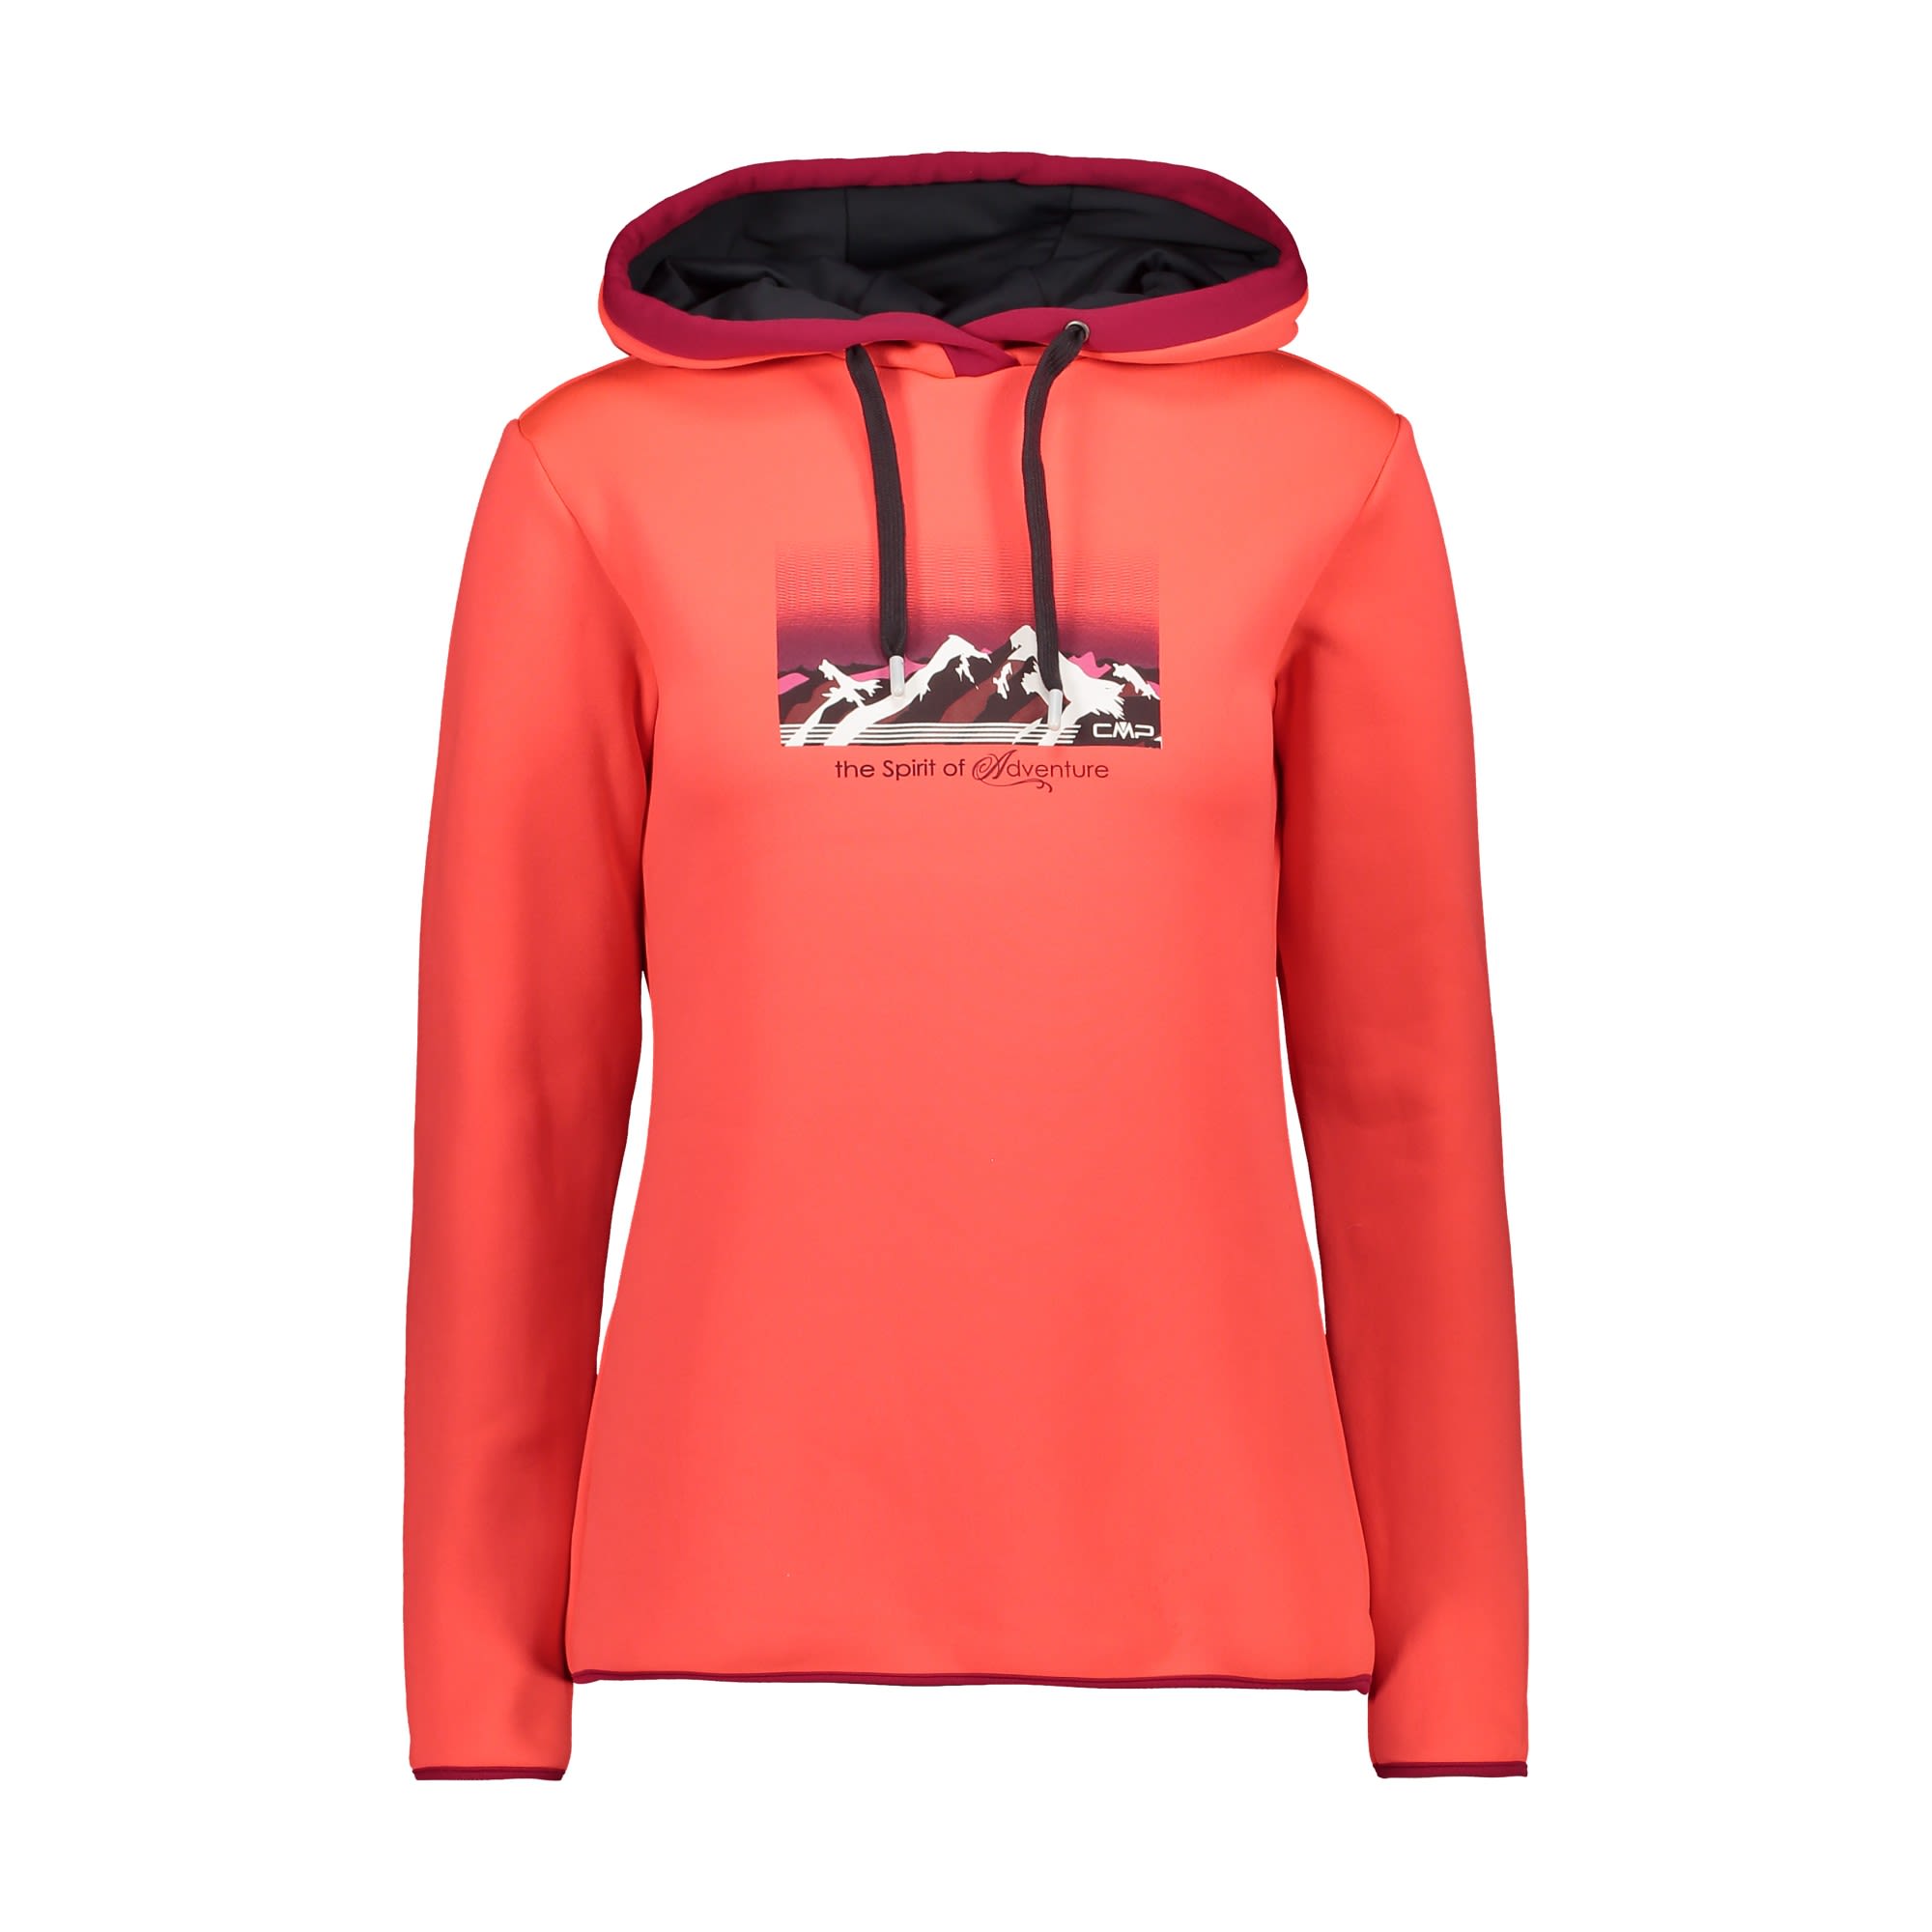 CMP Sweat FIX Hood Rot- Female Sweaters und Hoodies- Grsse 42 - Farbe Red Fluo